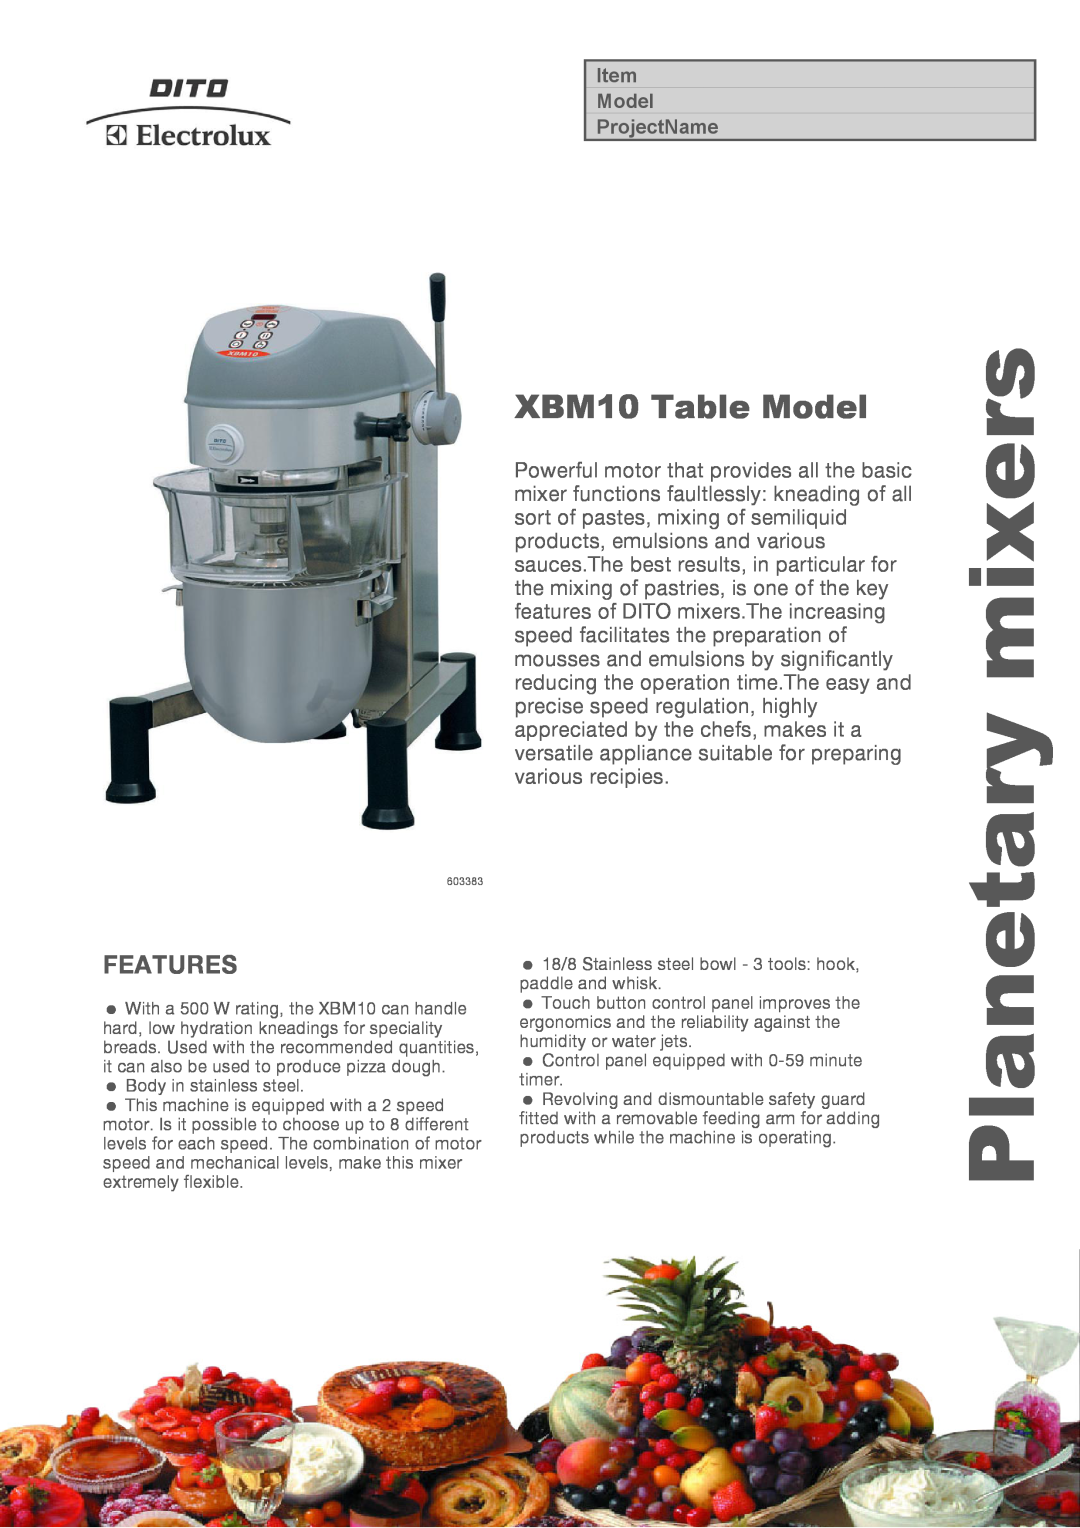 Electrolux XBM10S manual Features, Planetary mixers, XBM10 Table Model 